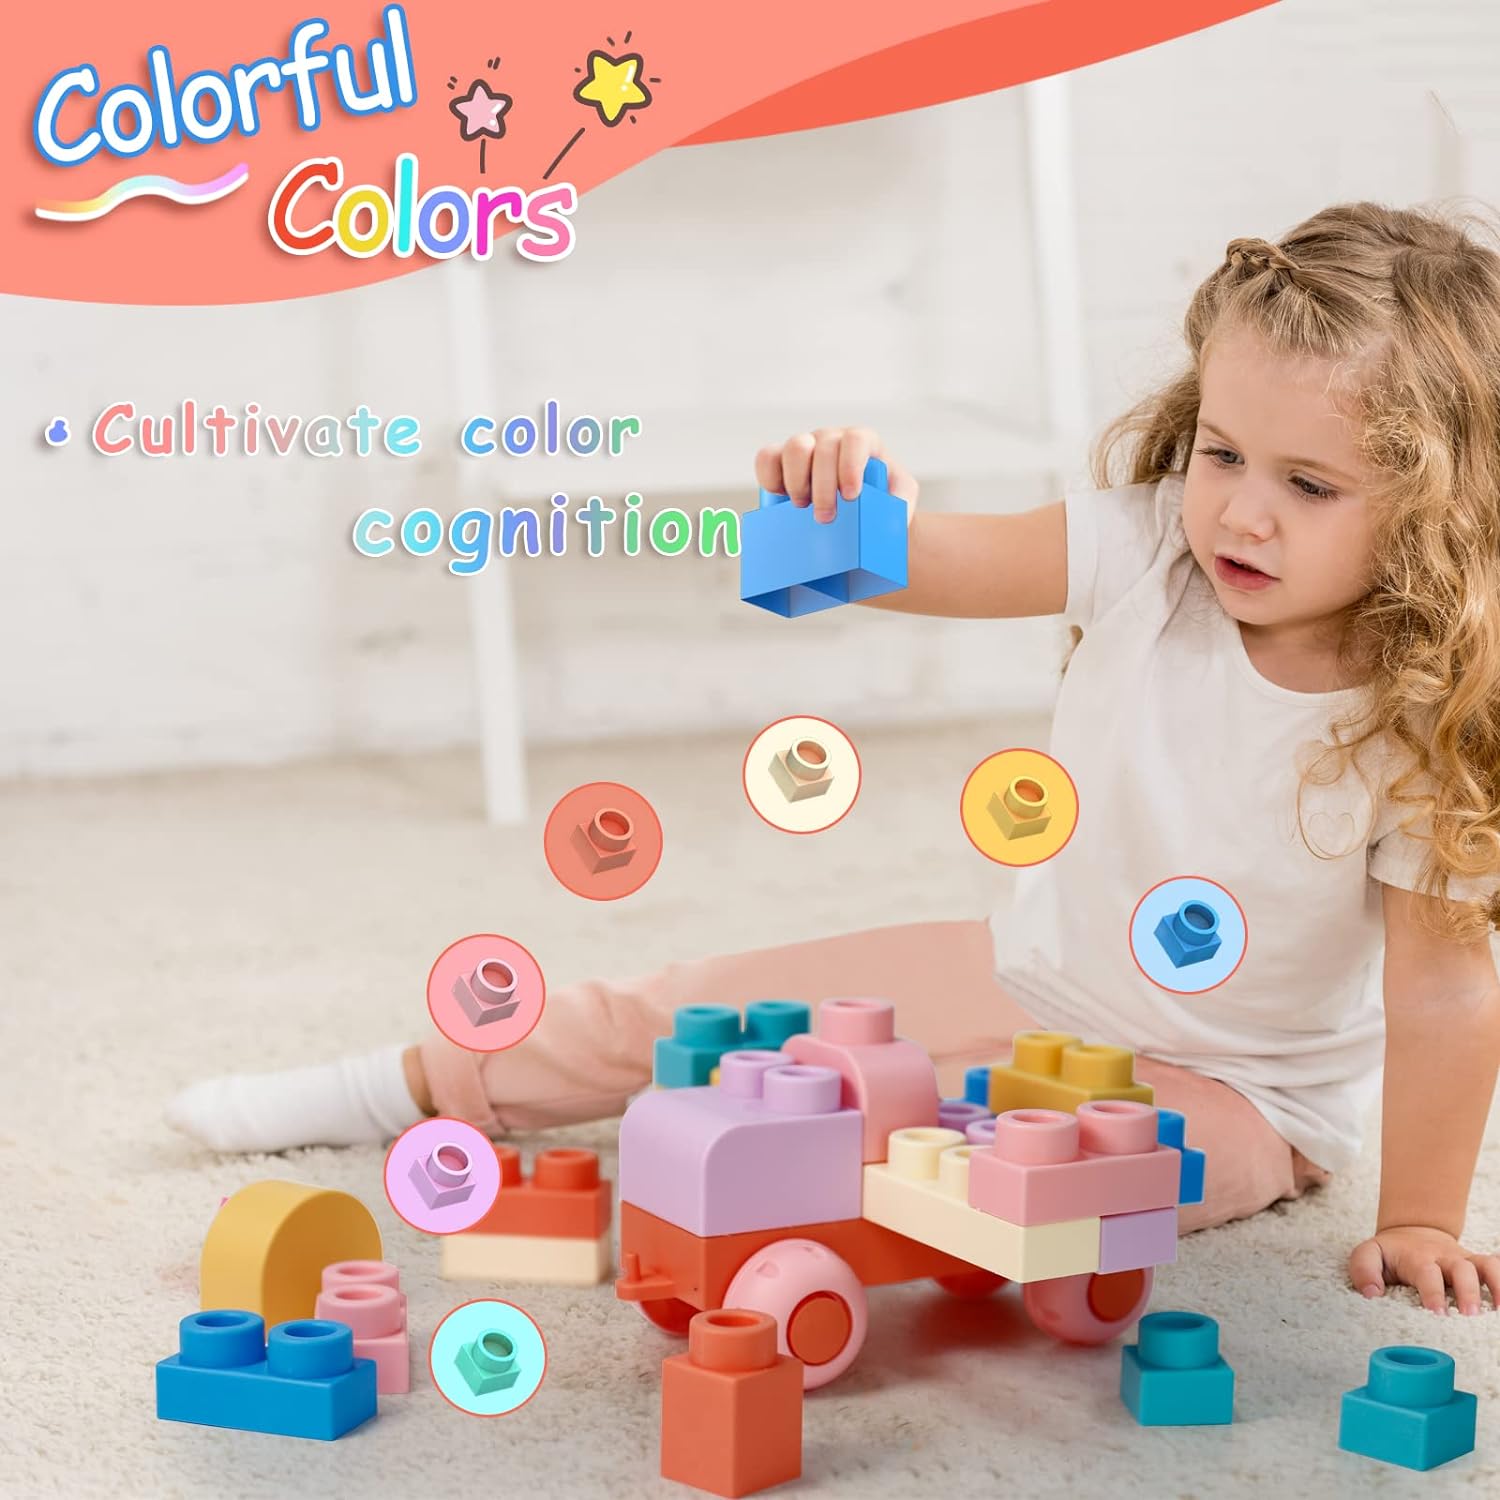 Top STEM Soft Building Block Sets for Kids Aged 18 months to 6 years old, preschool.Large Construction Block Toys for Toddler to Improve Imagination、Creativity、Hands-on Ability : Toys Games